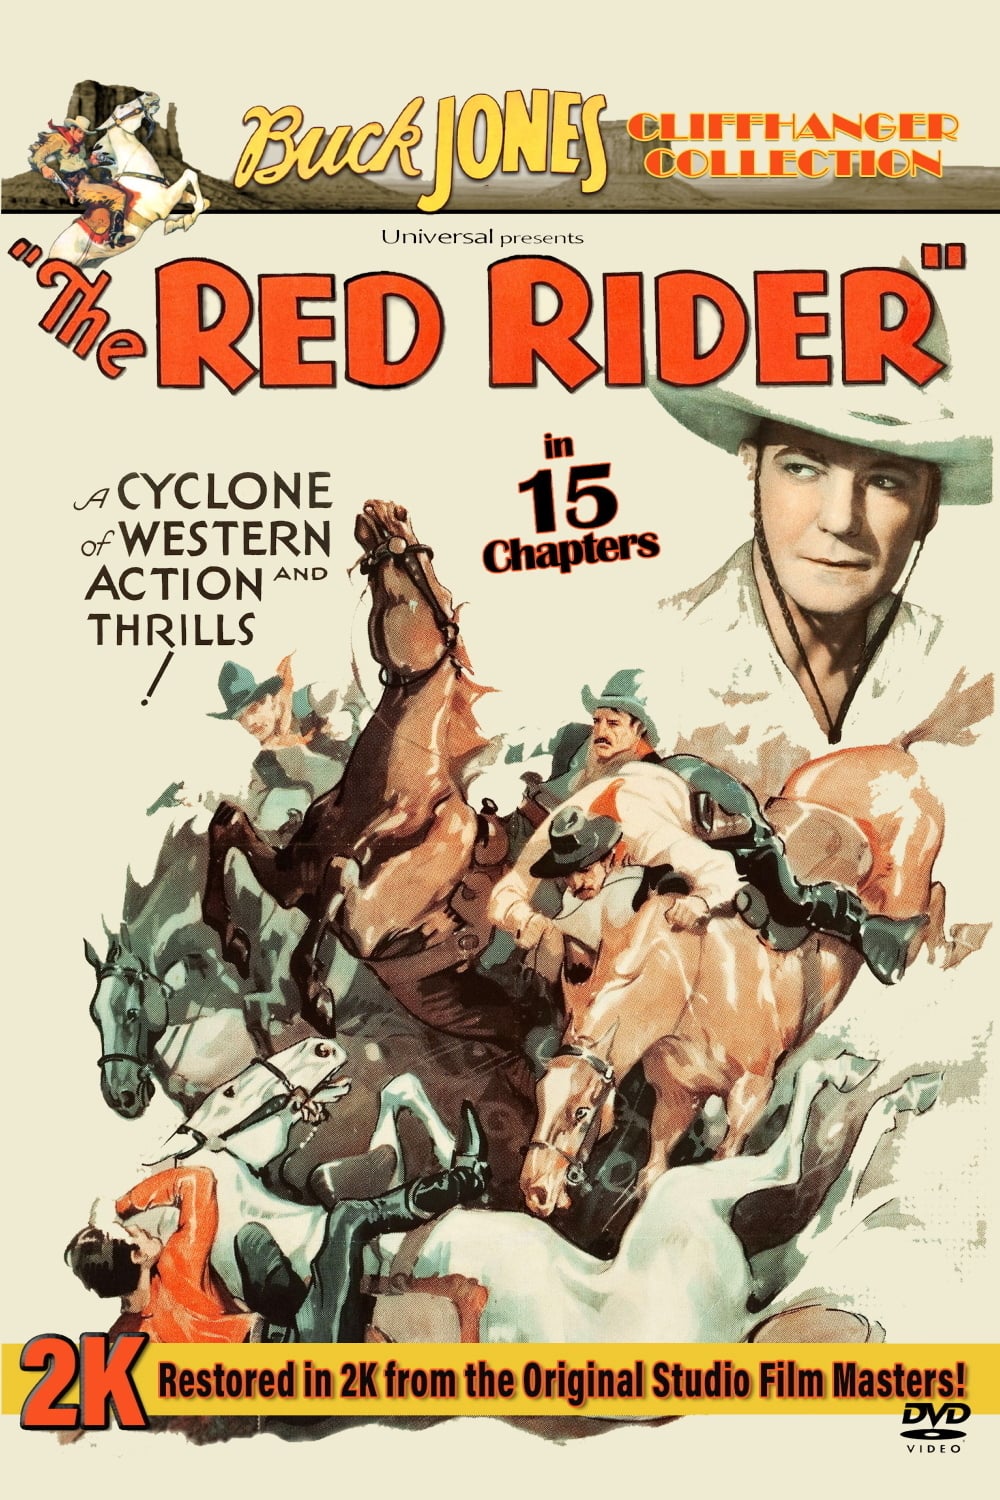 The Red Rider (1934)